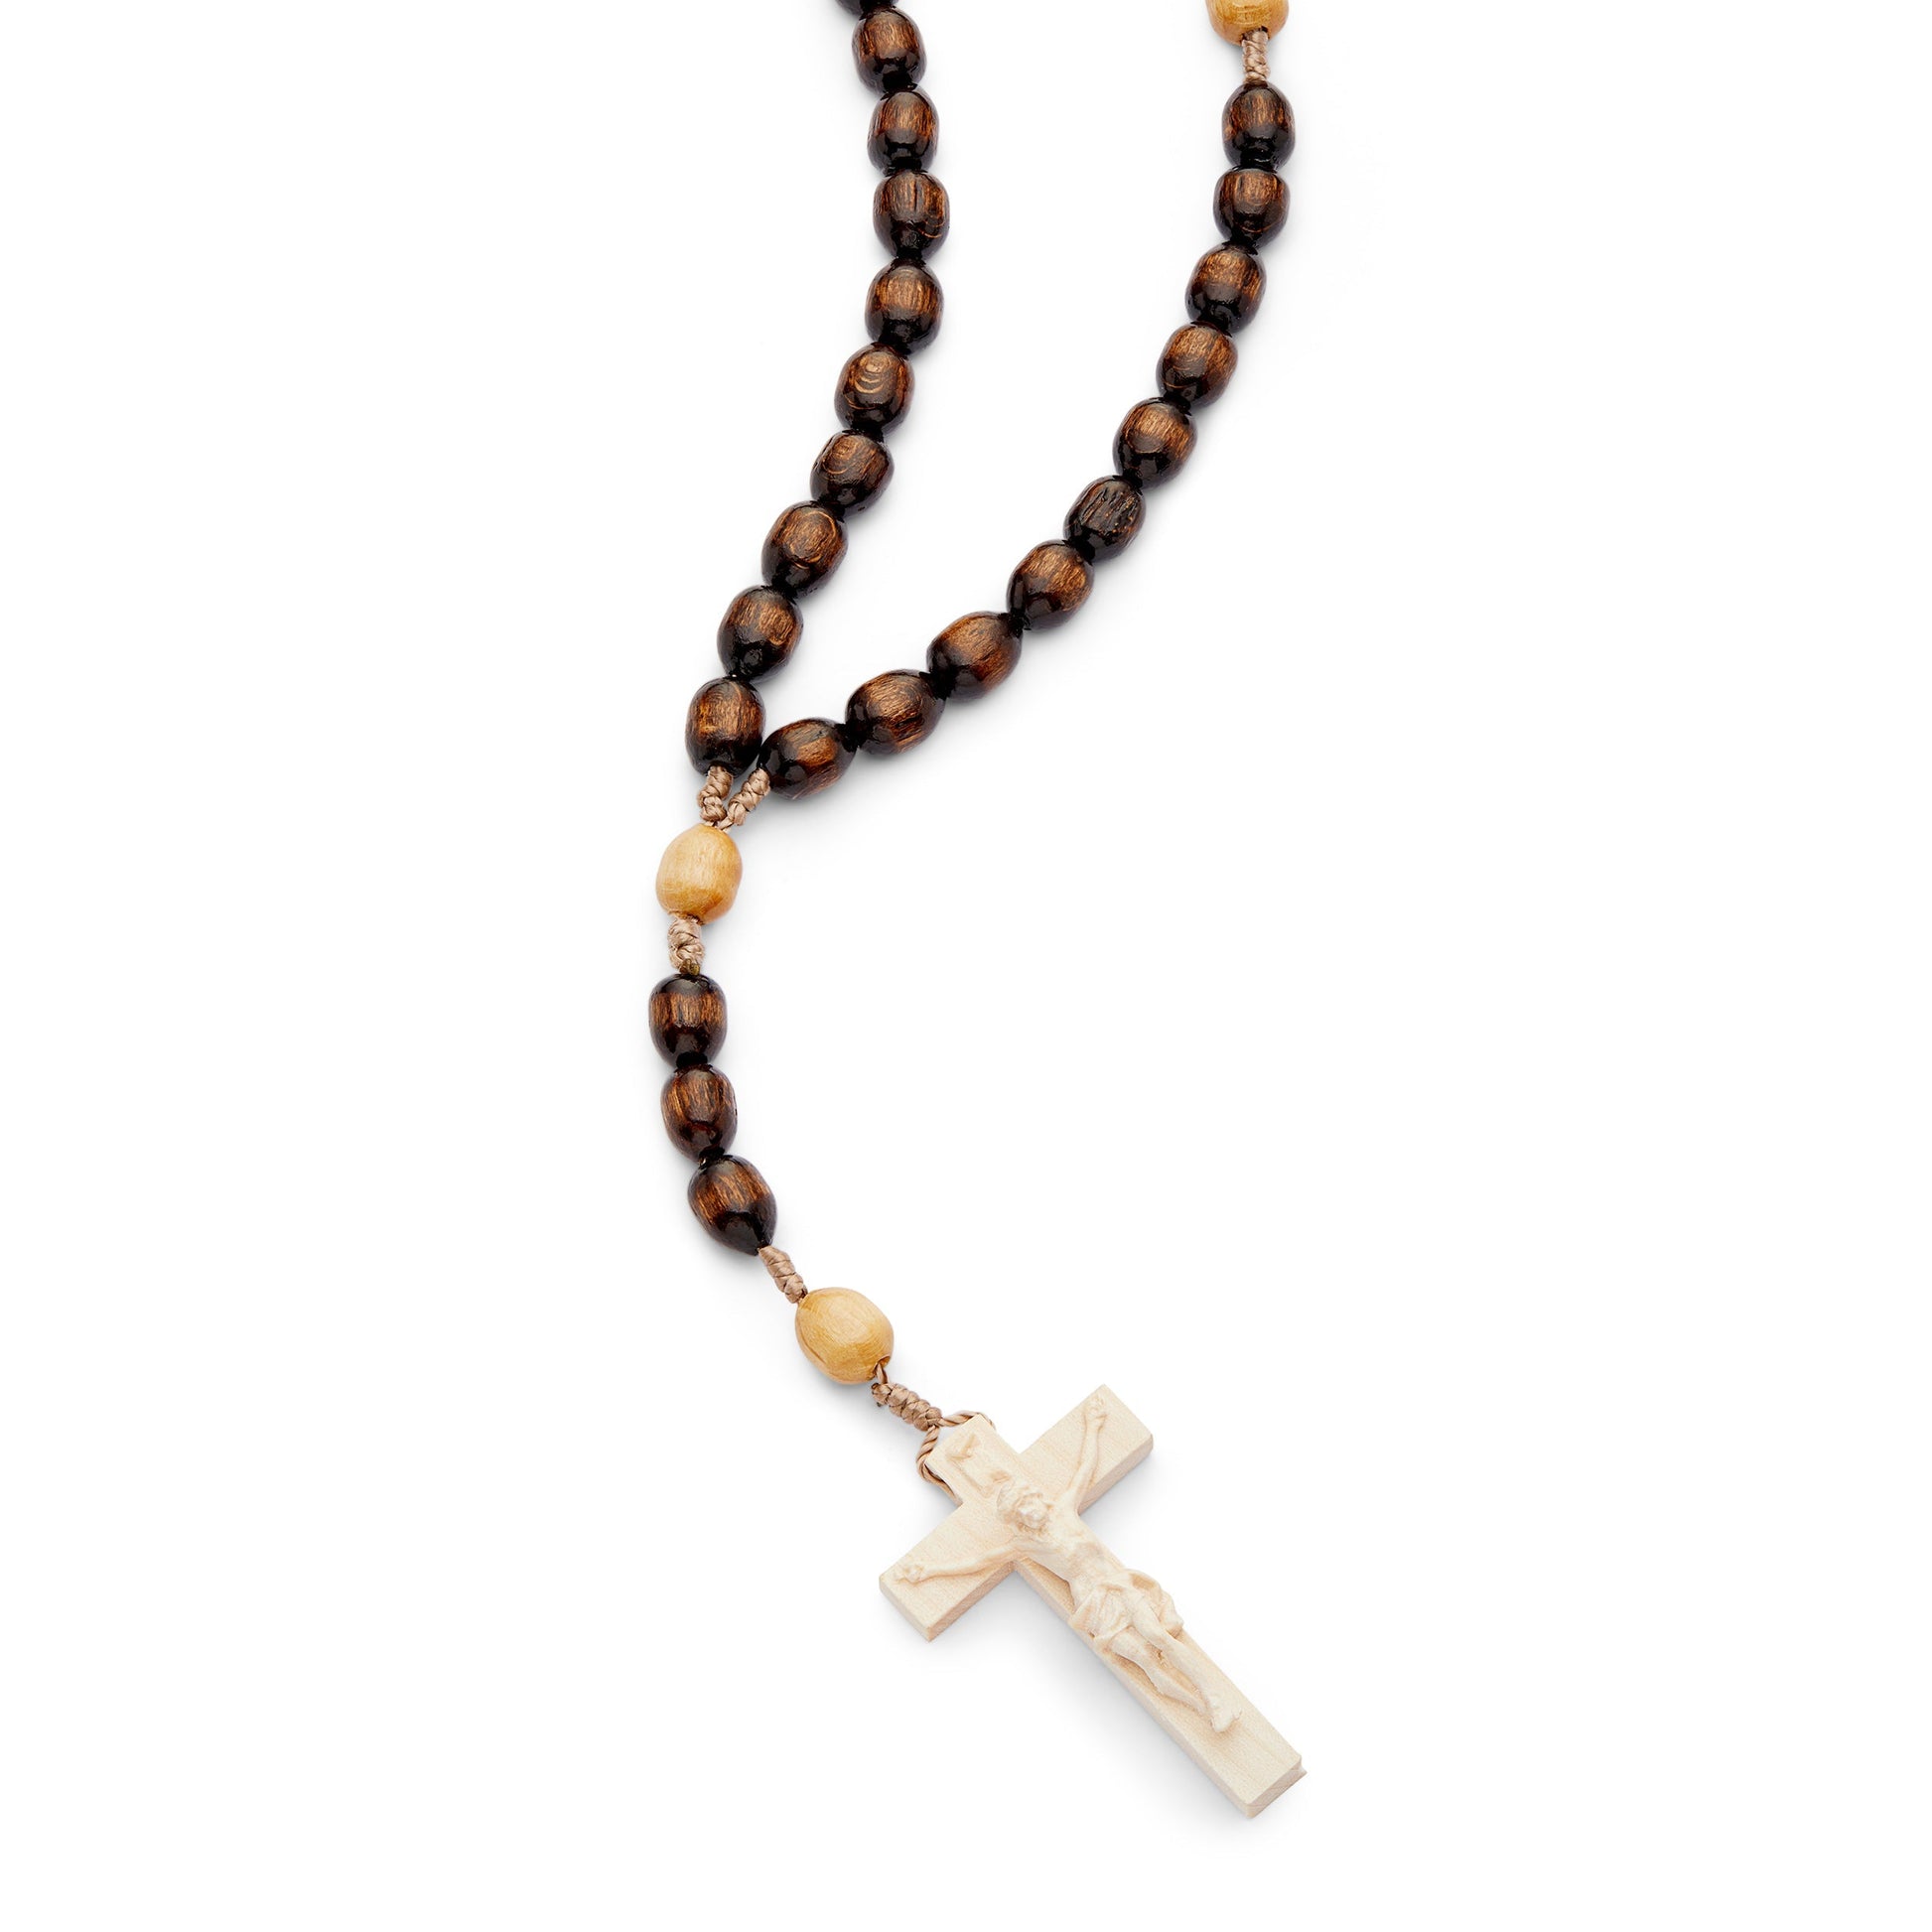 MONDO CATTOLICO Prayer Beads Natural Wood and Rope Rosary with Handcrafted Cross